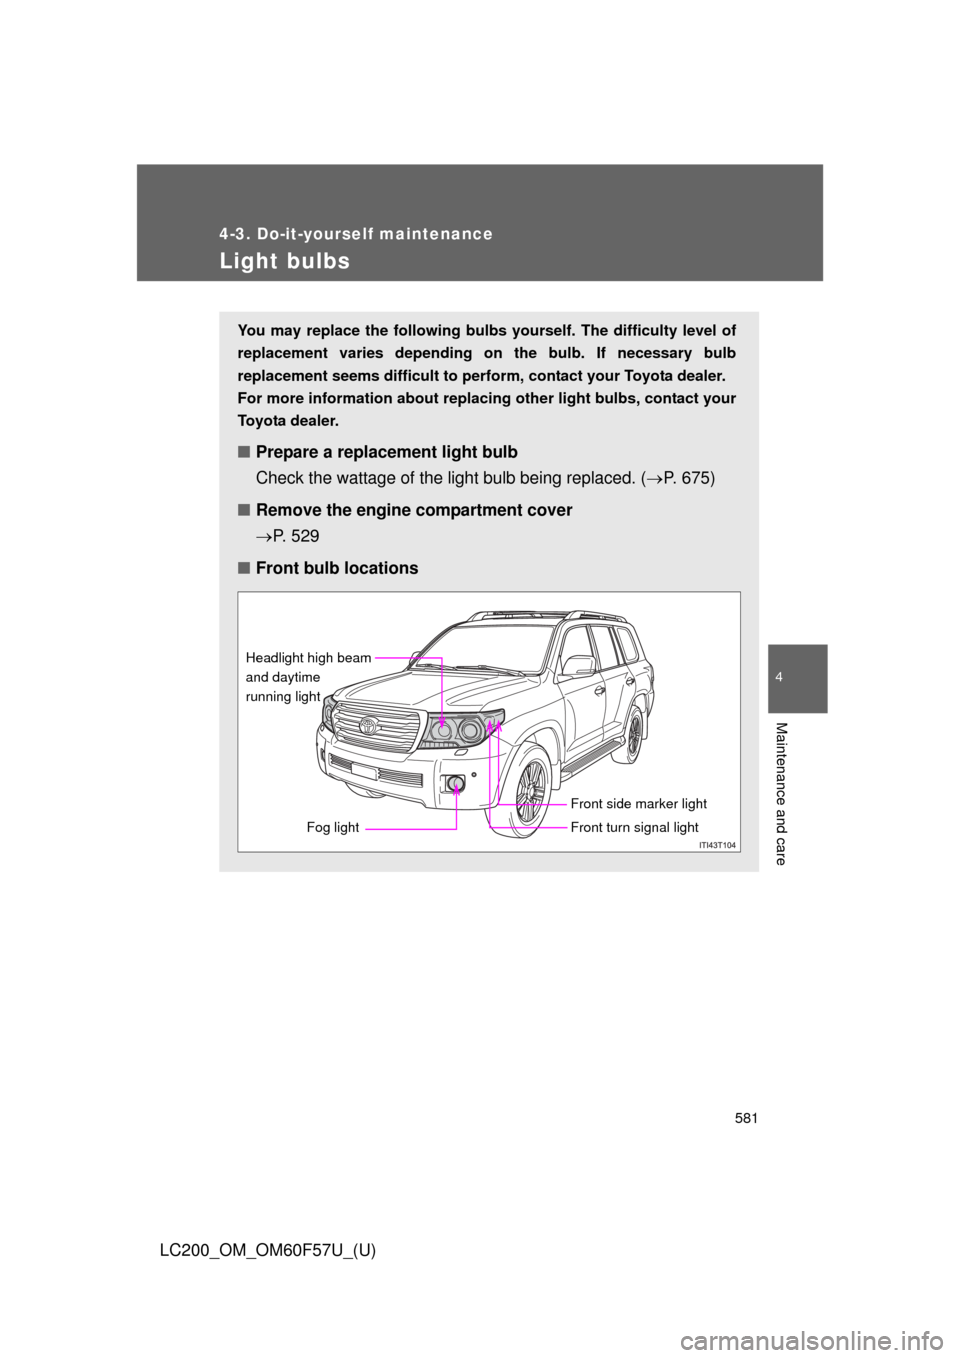 TOYOTA LAND CRUISER 2013 J200 Owners Manual 581
4-3. Do-it-yourself maintenance
4
Maintenance and care
LC200_OM_OM60F57U_(U)
Light bulbs
You may replace the following bulbs yourself. The difficulty level of
replacement varies depending on the b